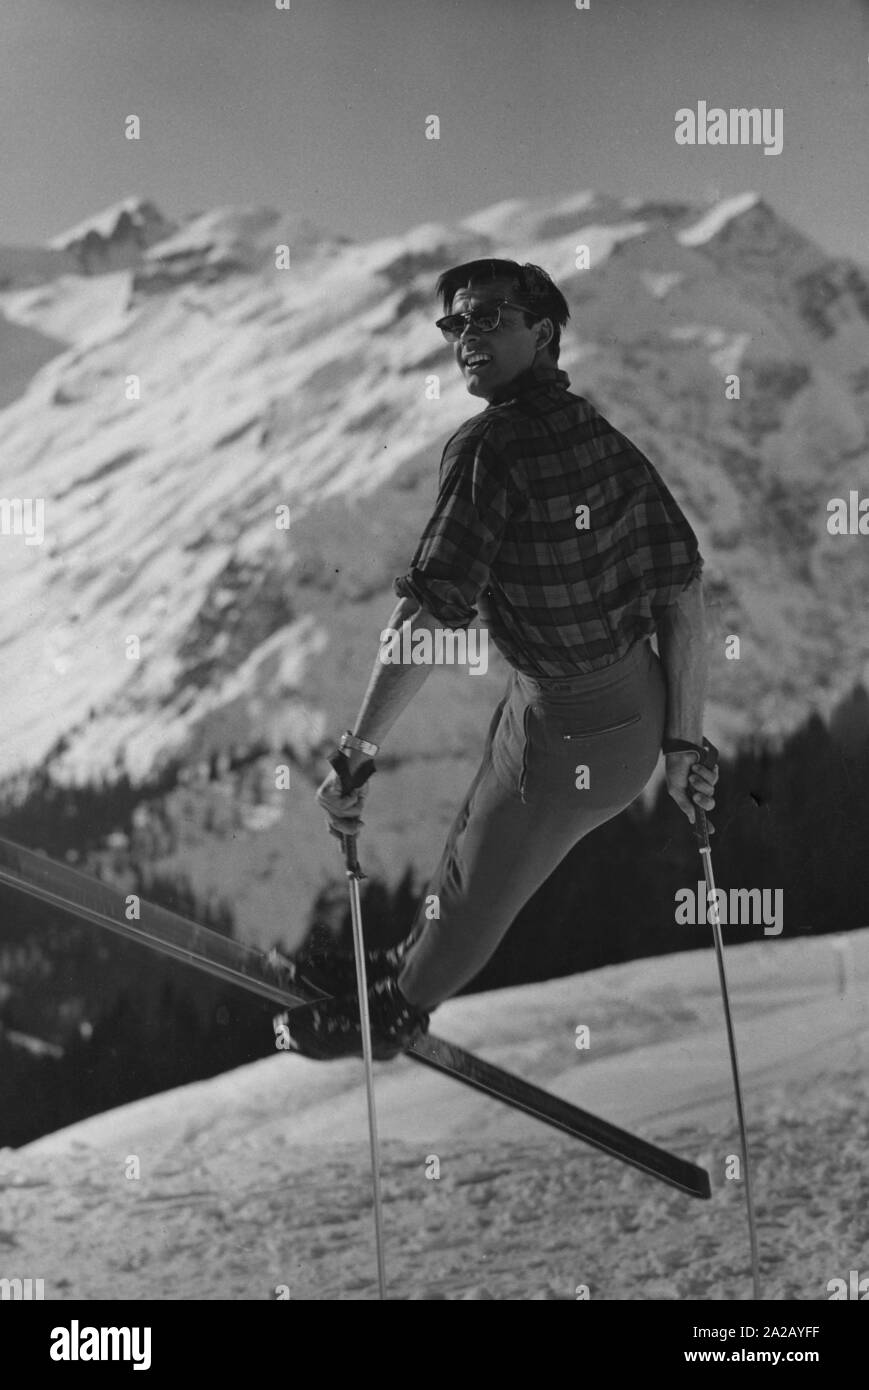 The Austrian skier Tony Sailer posing with skis and poles in front of the snow-covered Alps. Stock Photo